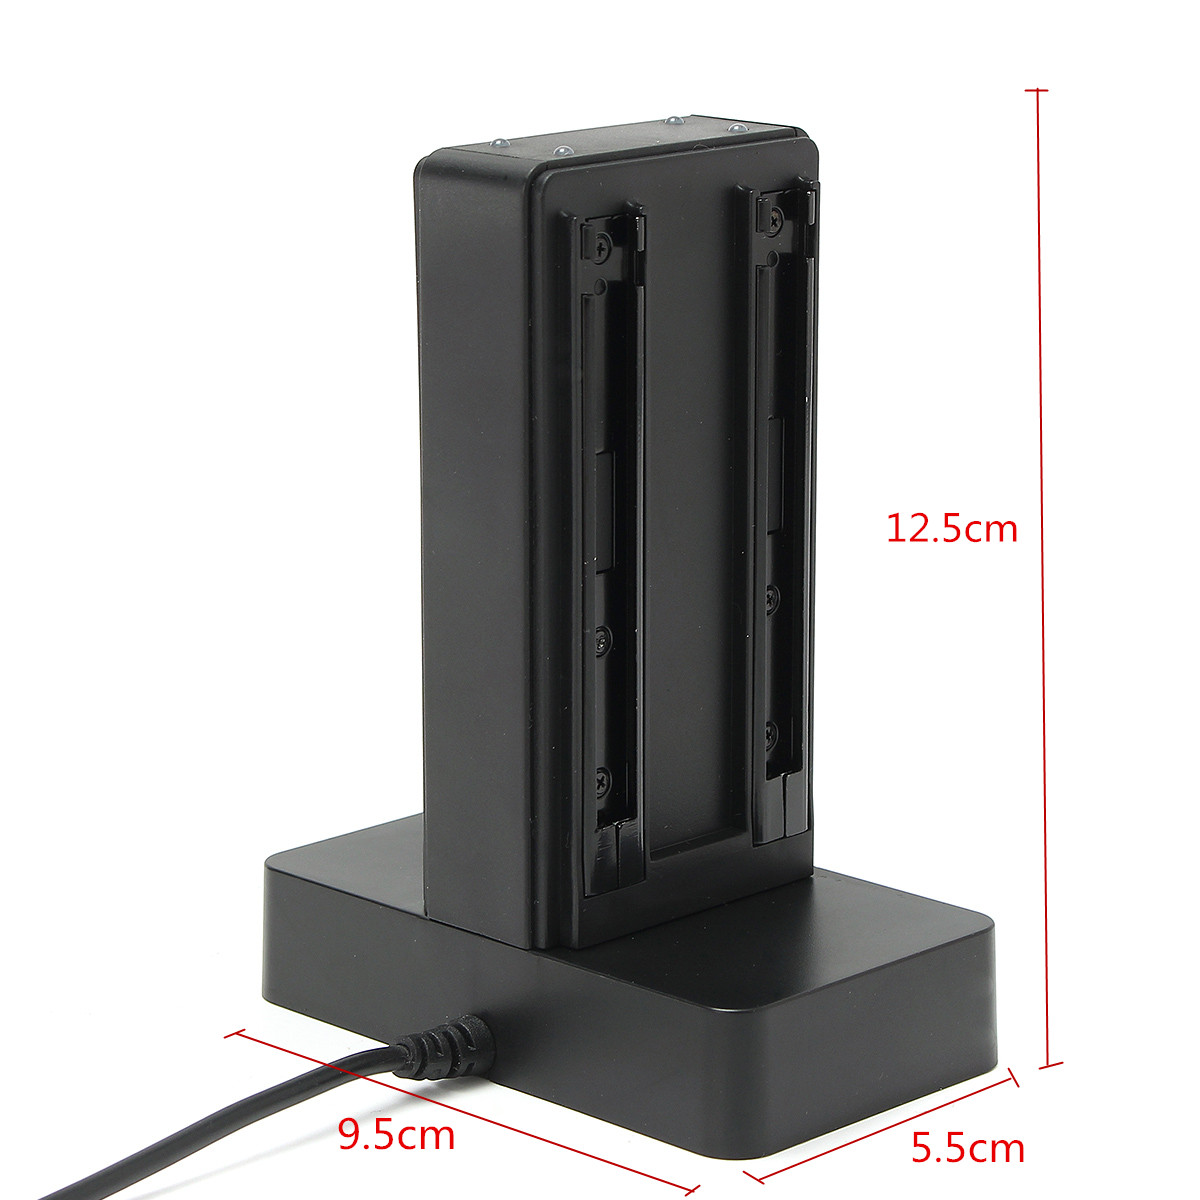 Charging Dock Station Charger Stand For Nintendo Switch 4 Joy-Con Controller 64